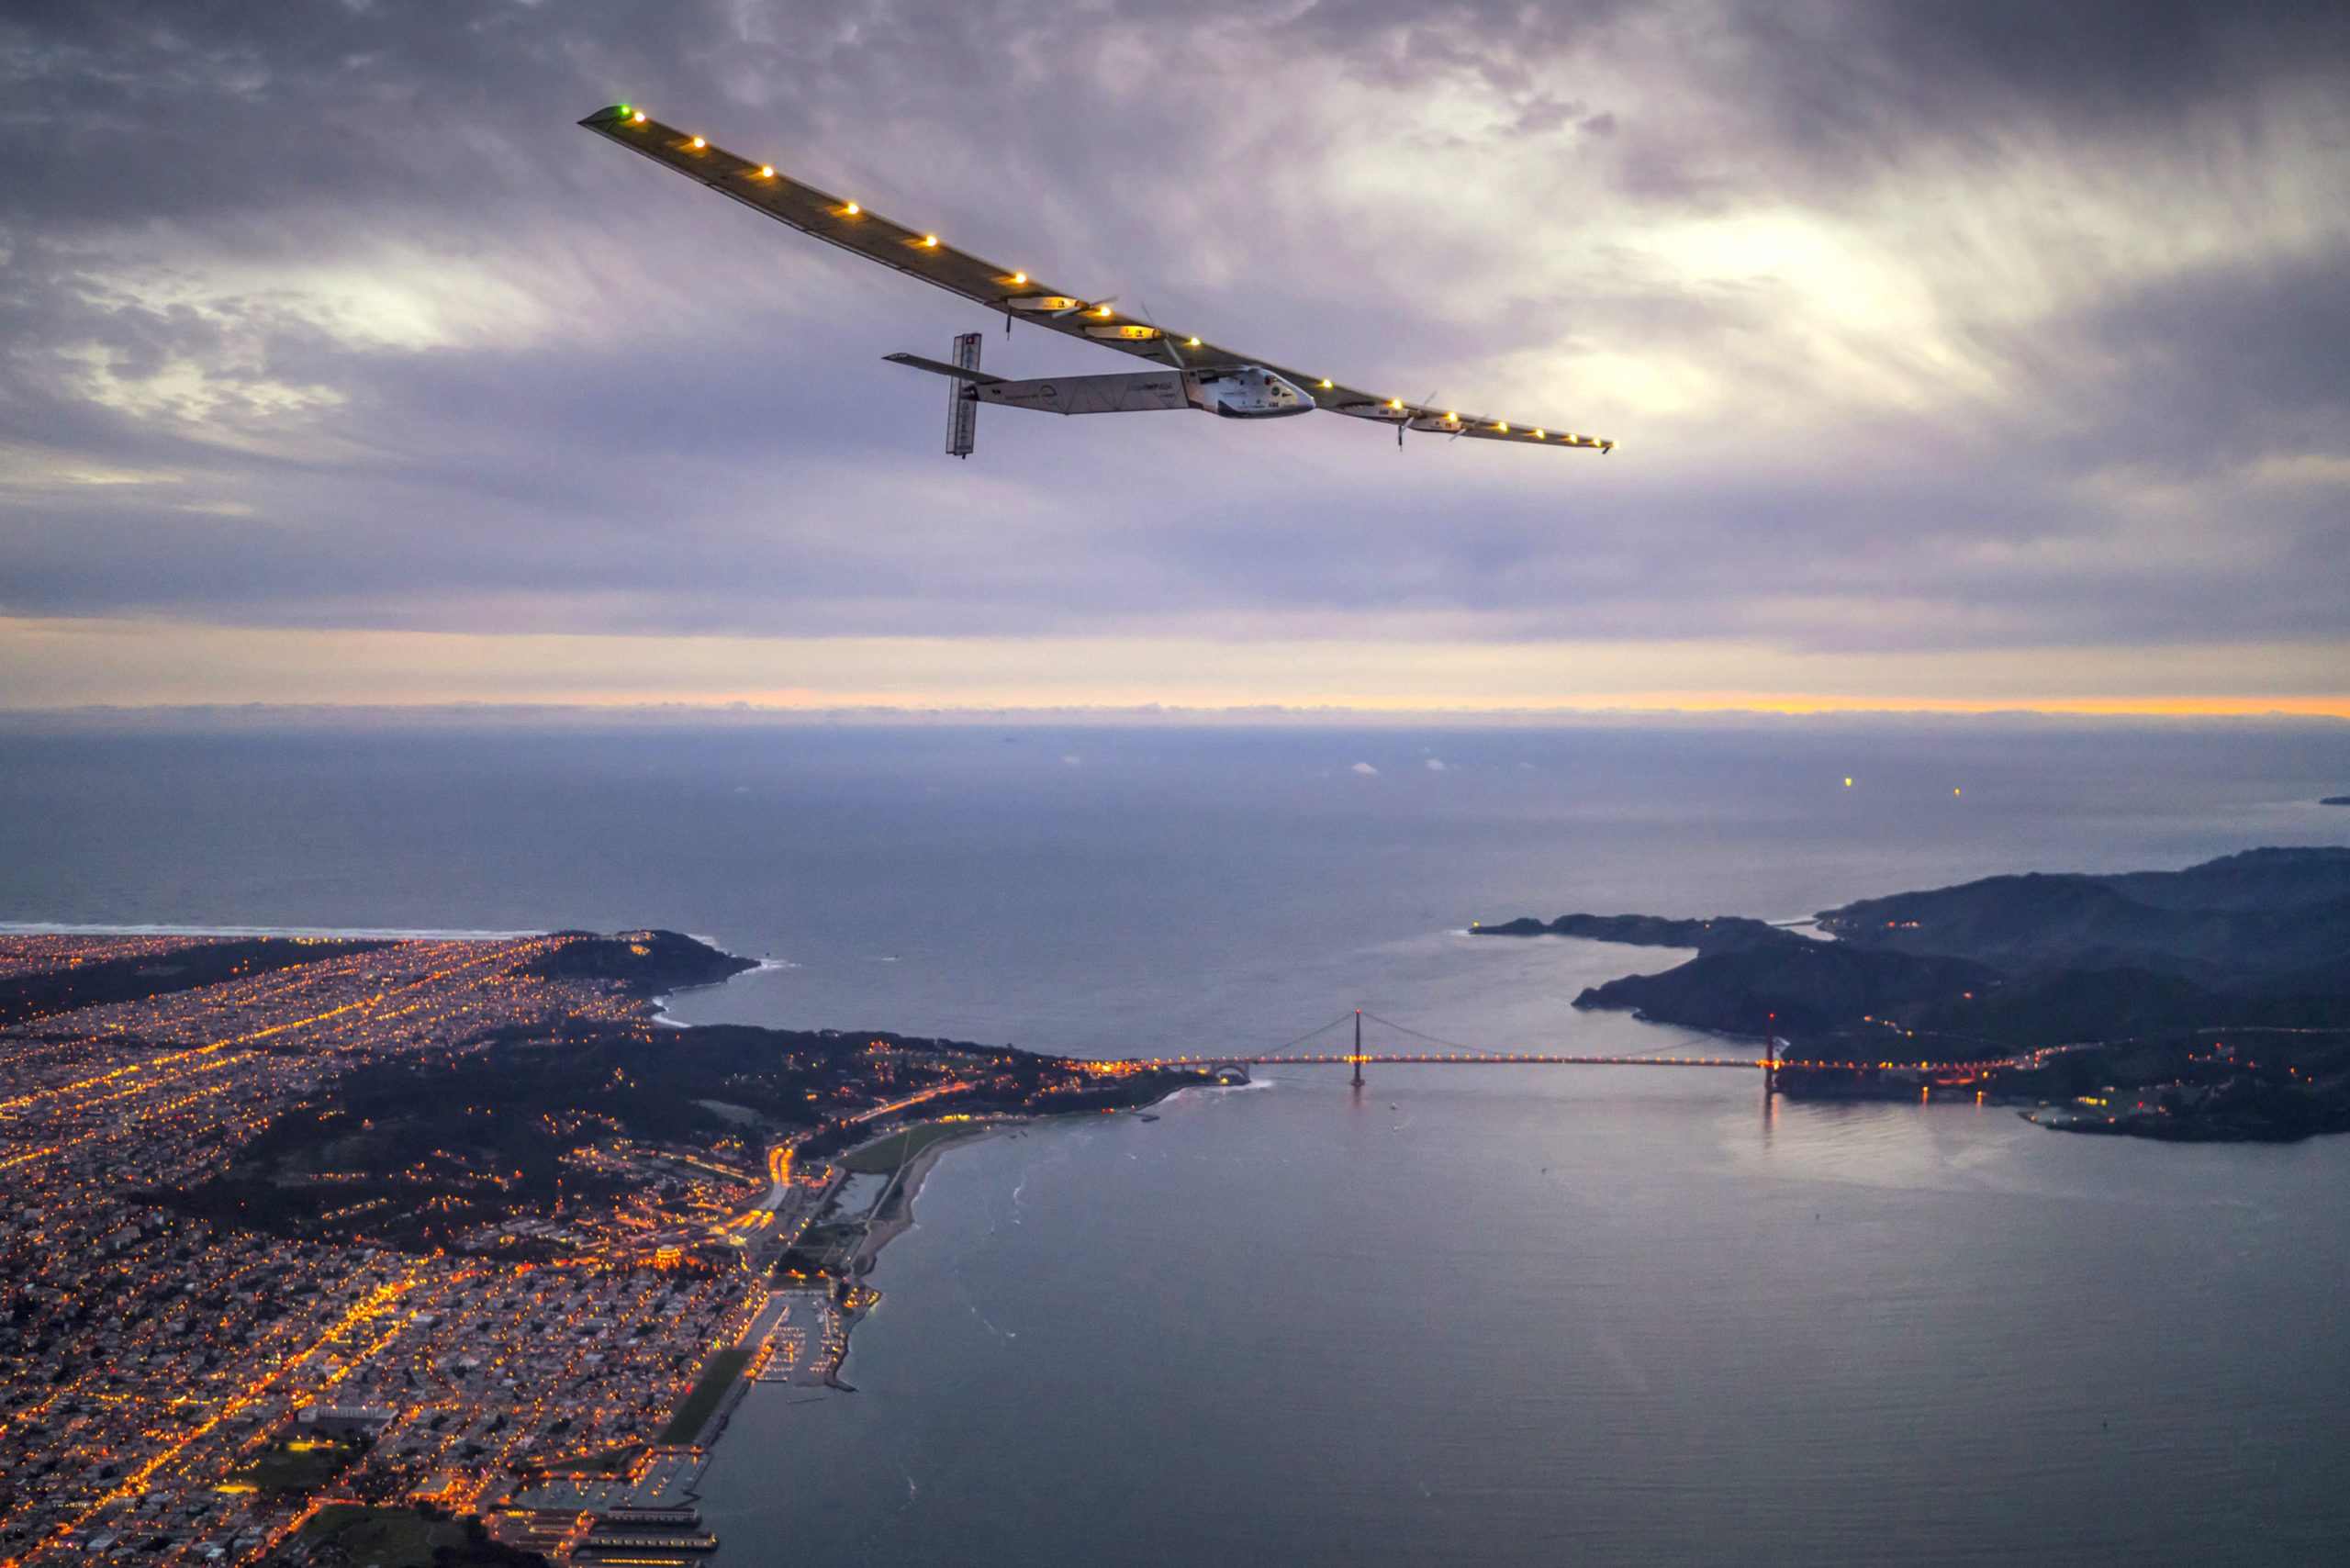 Solar Impulse 2 Successfully Landed In California After 62 Hours In The Air